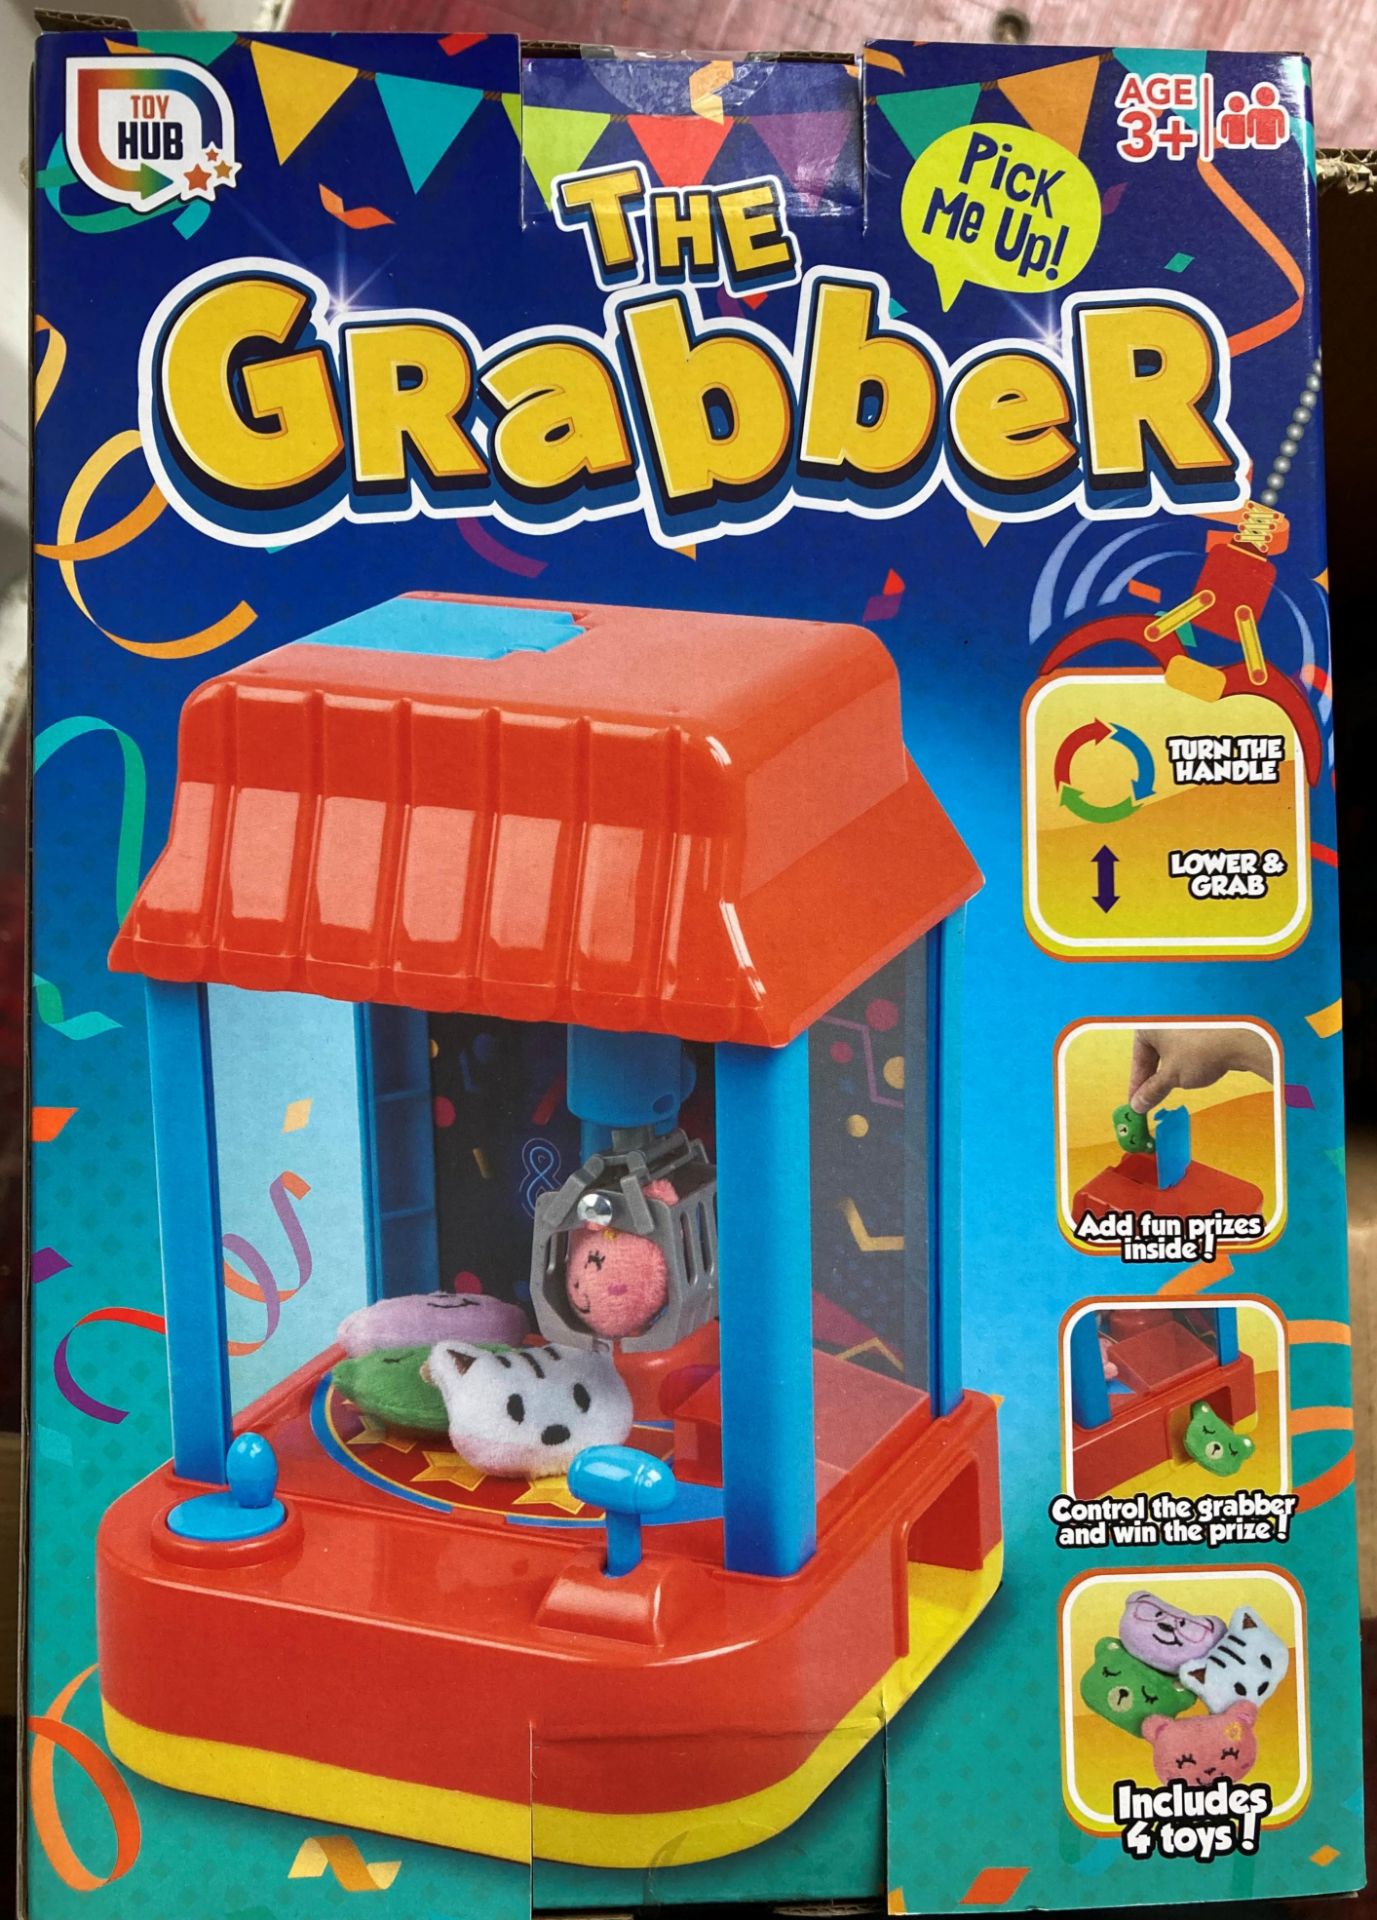 24 x RMS-R05-1064 grabber games (4 x outer boxes) (saleroom location: container 7)